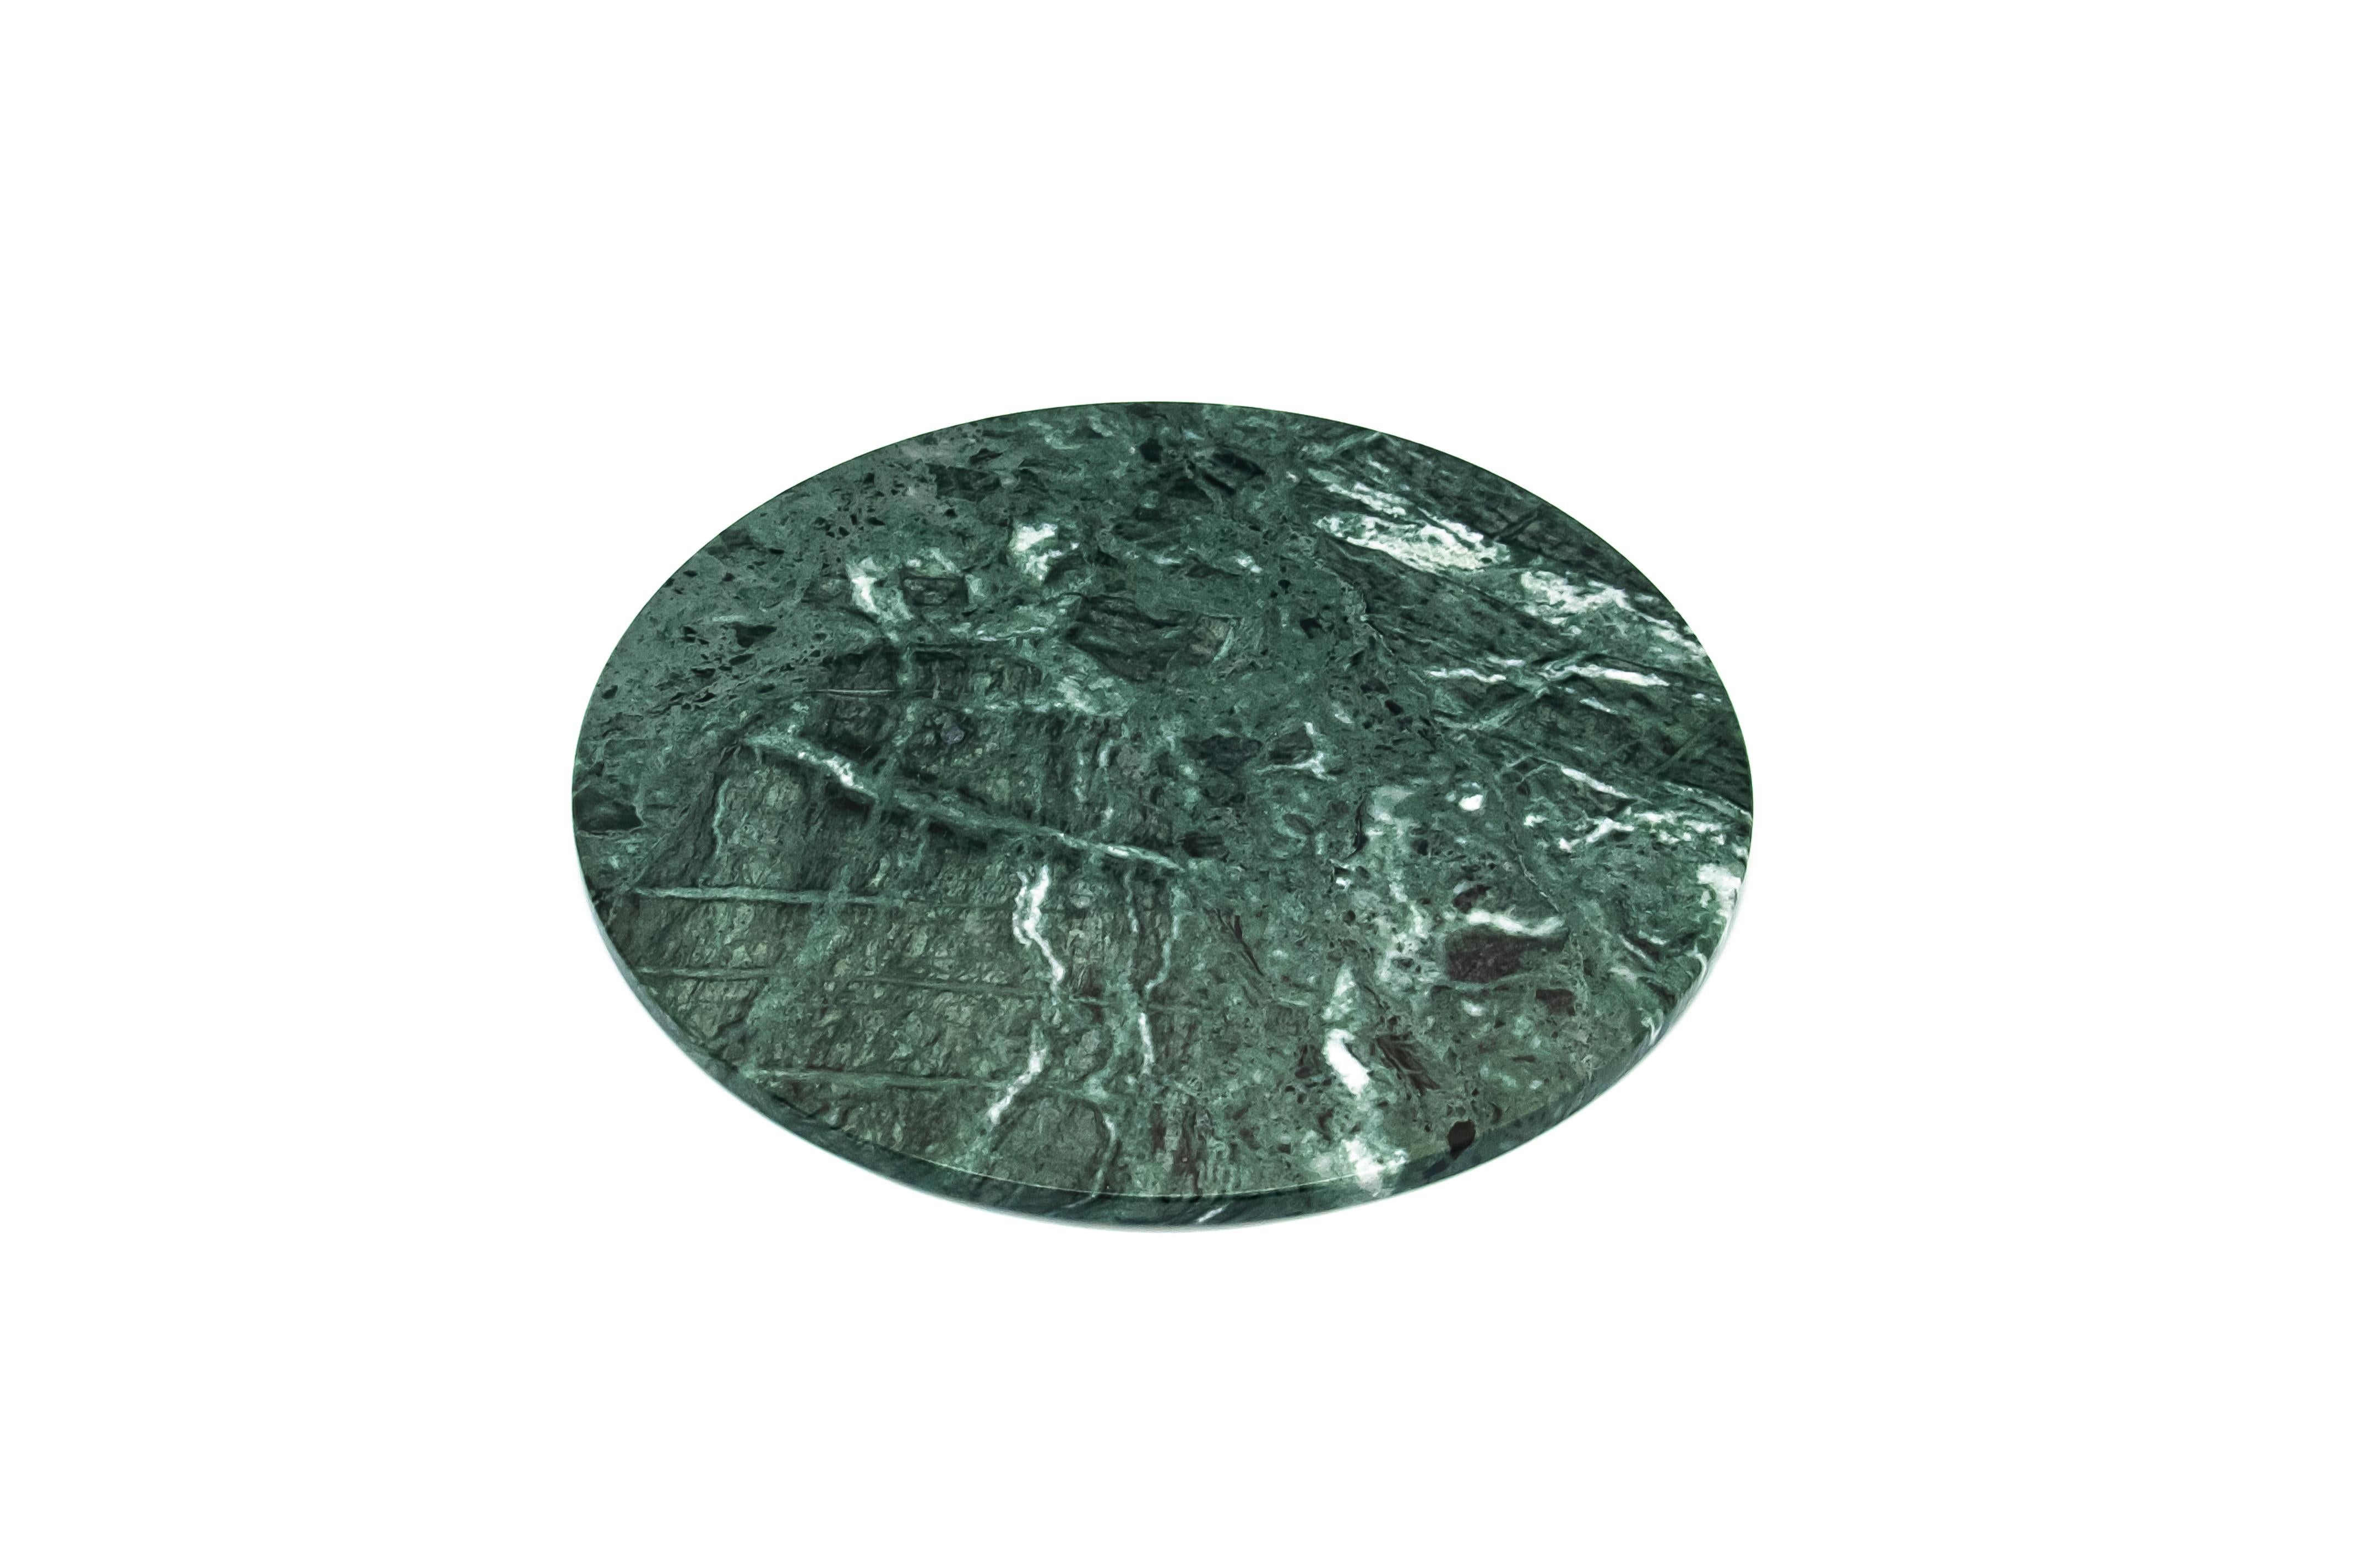 Rounded green Guatemala marble cheese plate. Each piece is in a way unique (every marble block is different in veins and shades) and handmade by Italian artisans specialized over generations in processing marble. Slight variations in shape, color